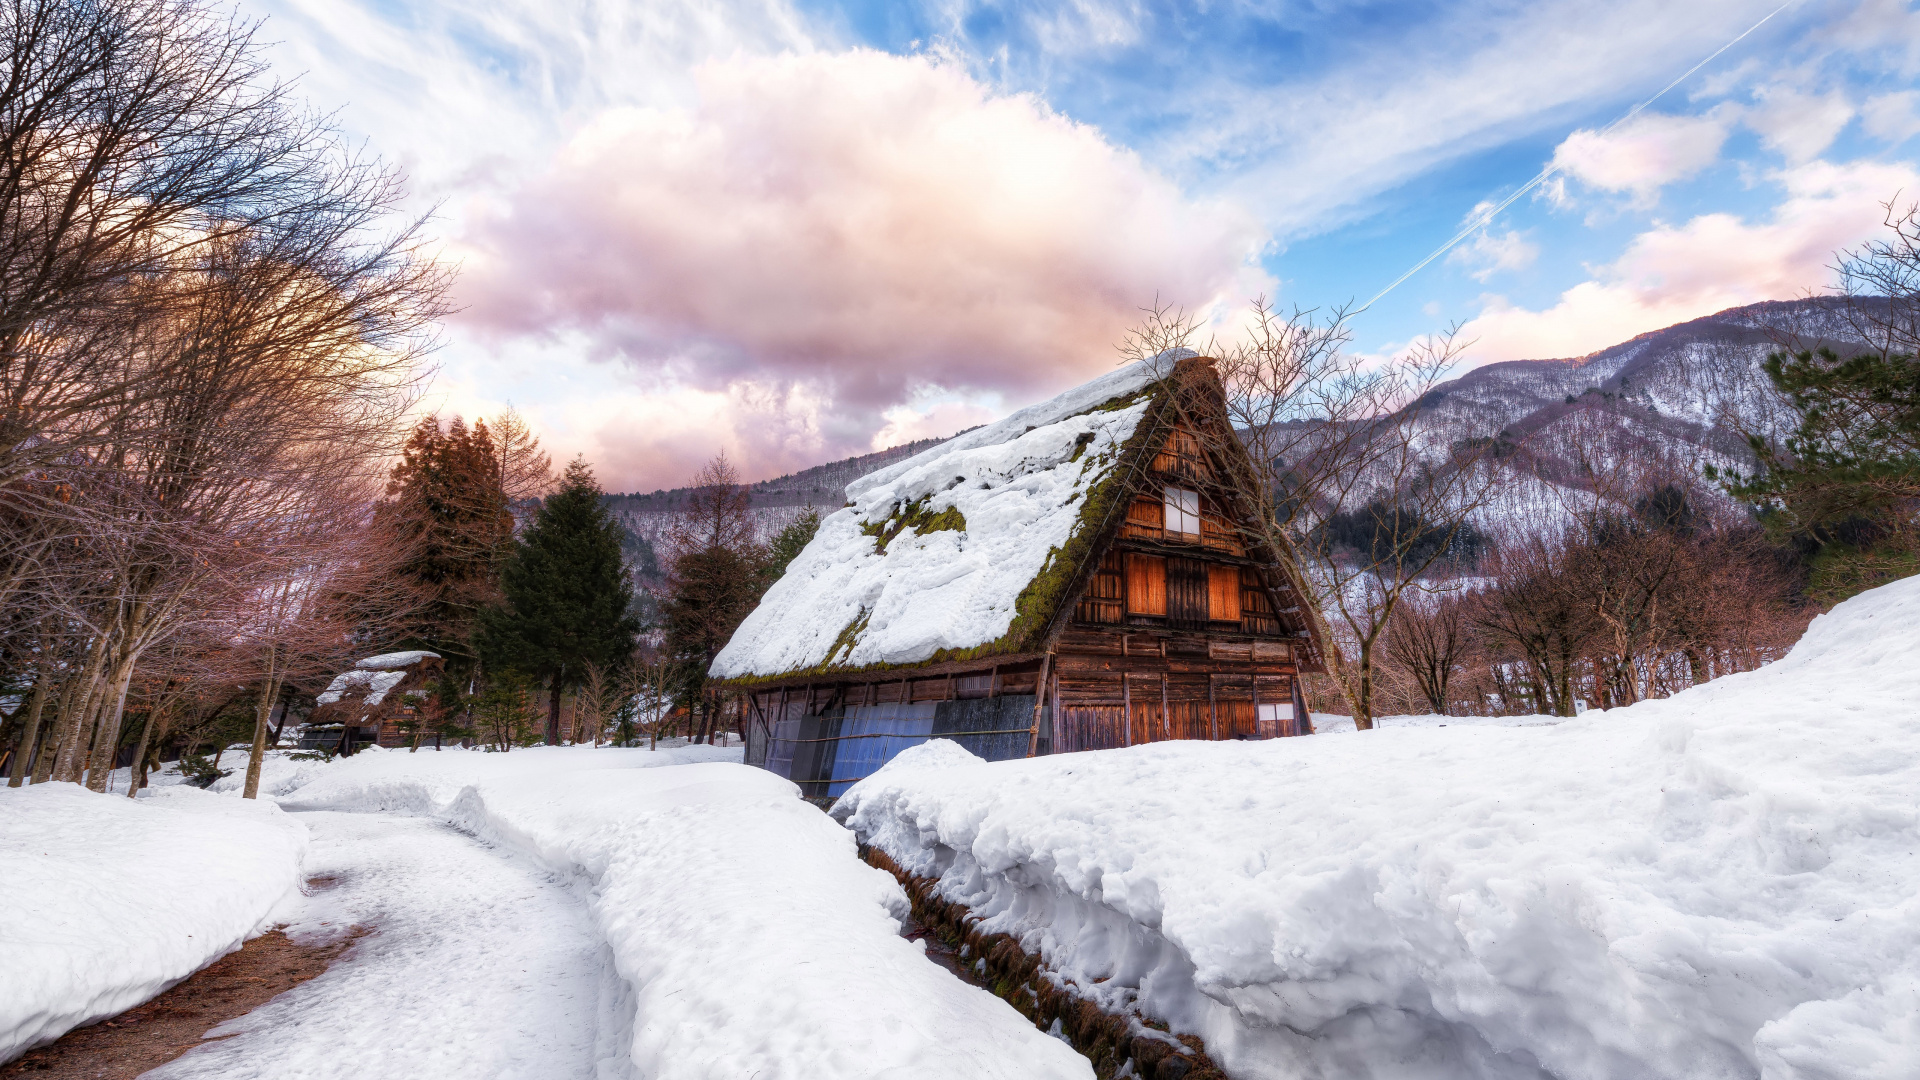 Brown Wooden House on Snow Covered Ground Under White Clouds and Blue Sky During Daytime. Wallpaper in 1920x1080 Resolution